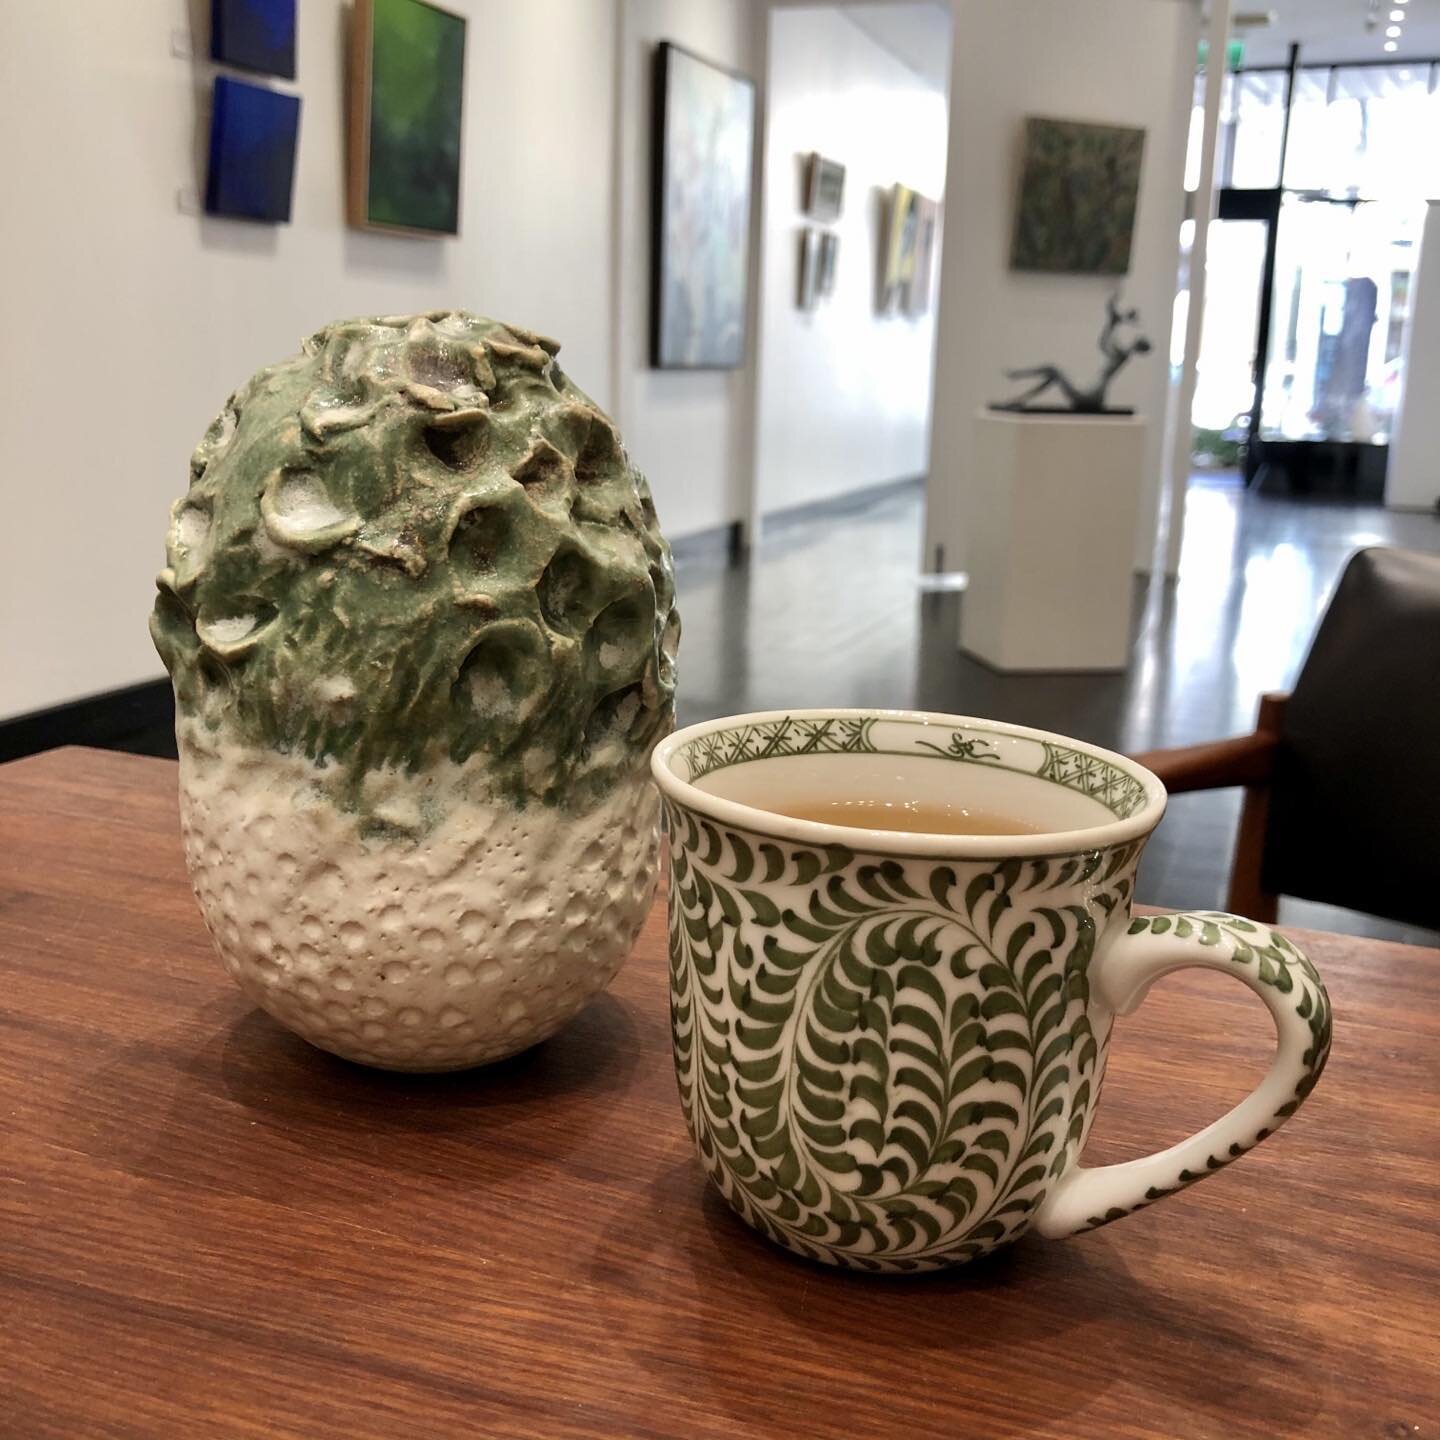 Come and join me for a cuppa @artgalleryondarling Balmain Sydney #ceramics #exhibition